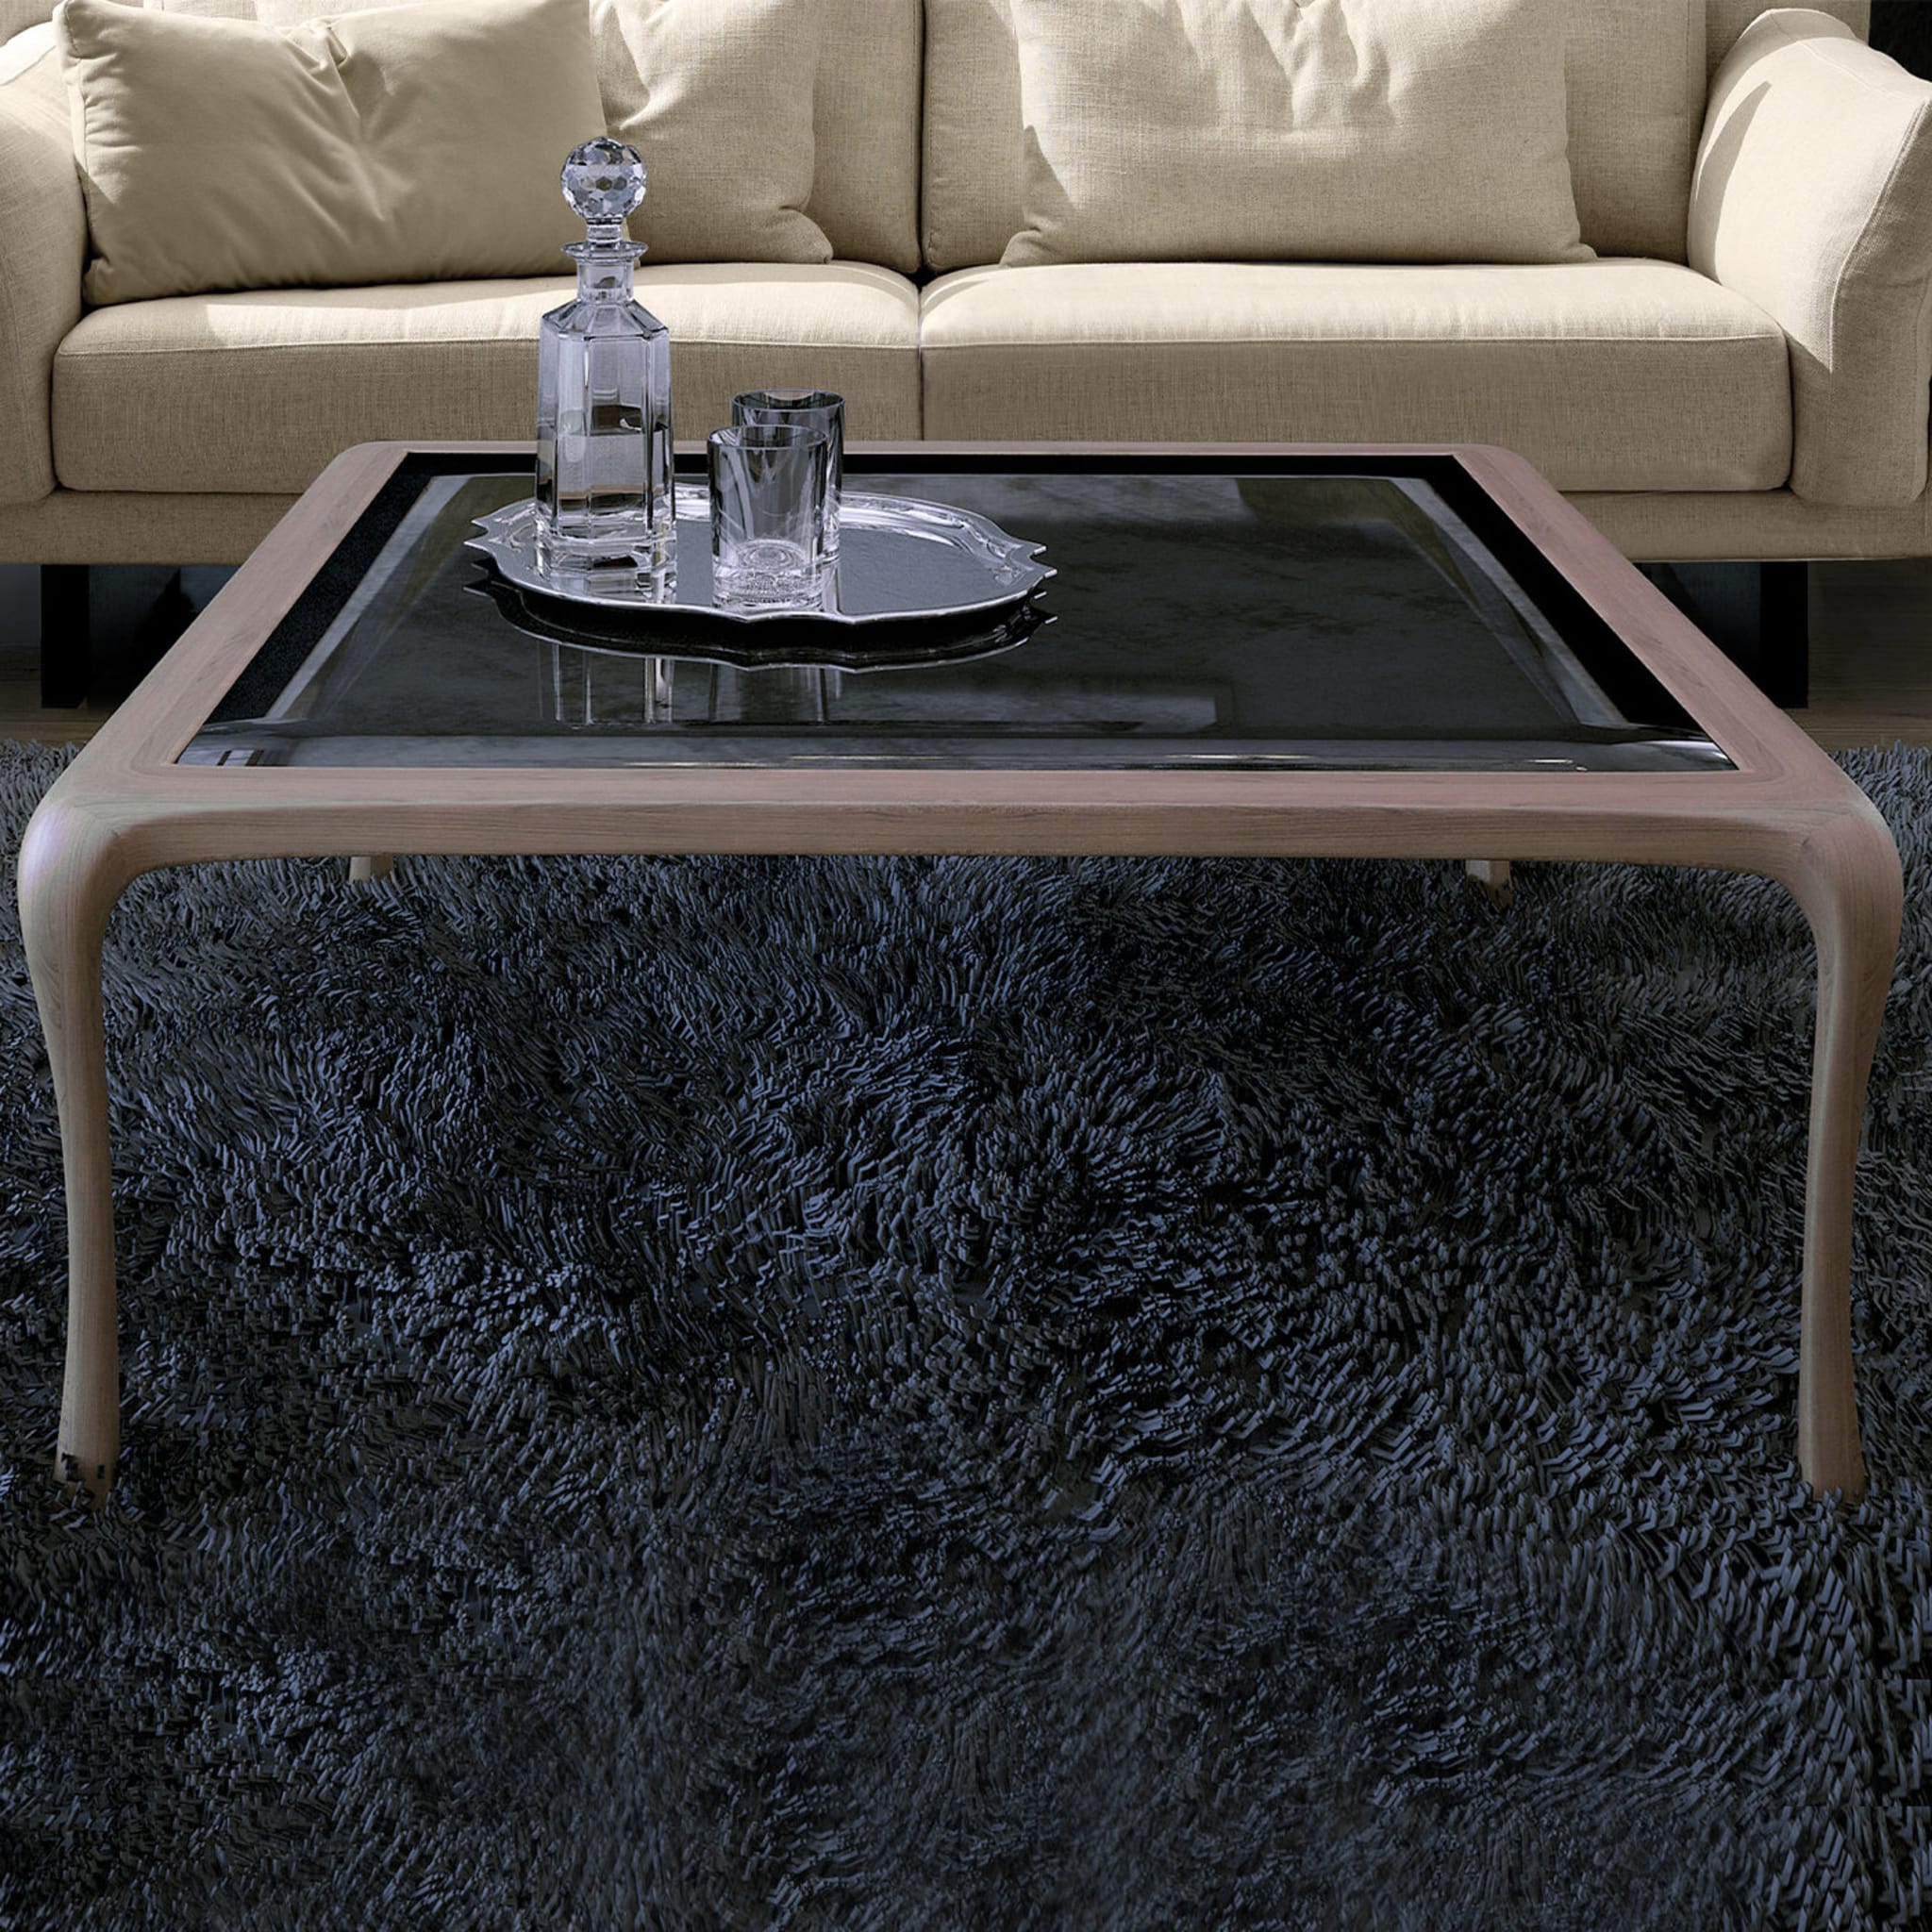 Light-Walnut Square Coffee Table with Glass Top - Alternative view 1